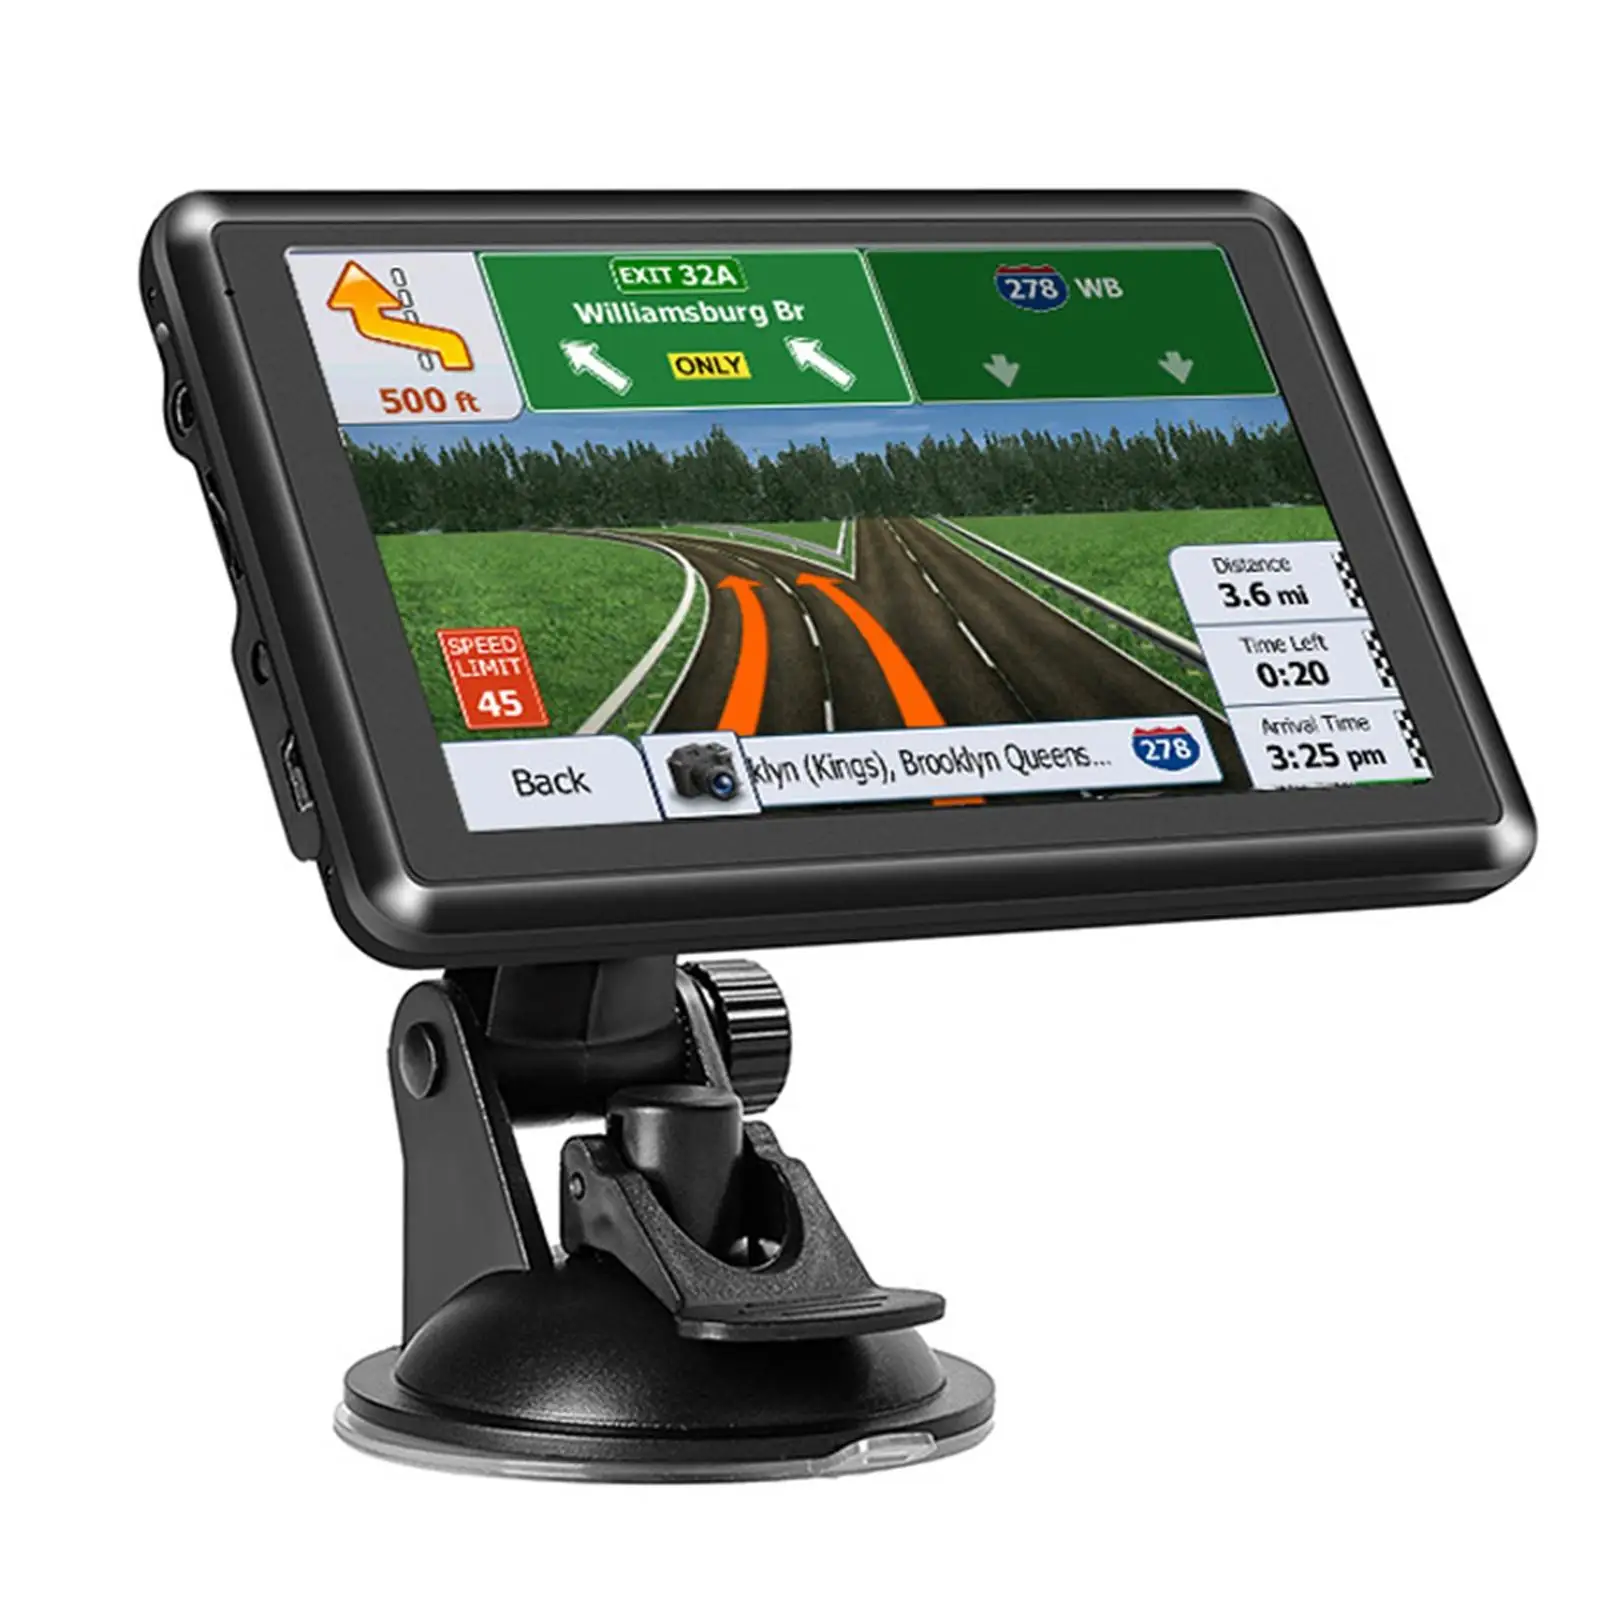 5 inch Touch Screen Car Truck GPS Navigation System GPS Navigator Device, Voice Direction FM Satellite 8GB 128 MB Vehicle